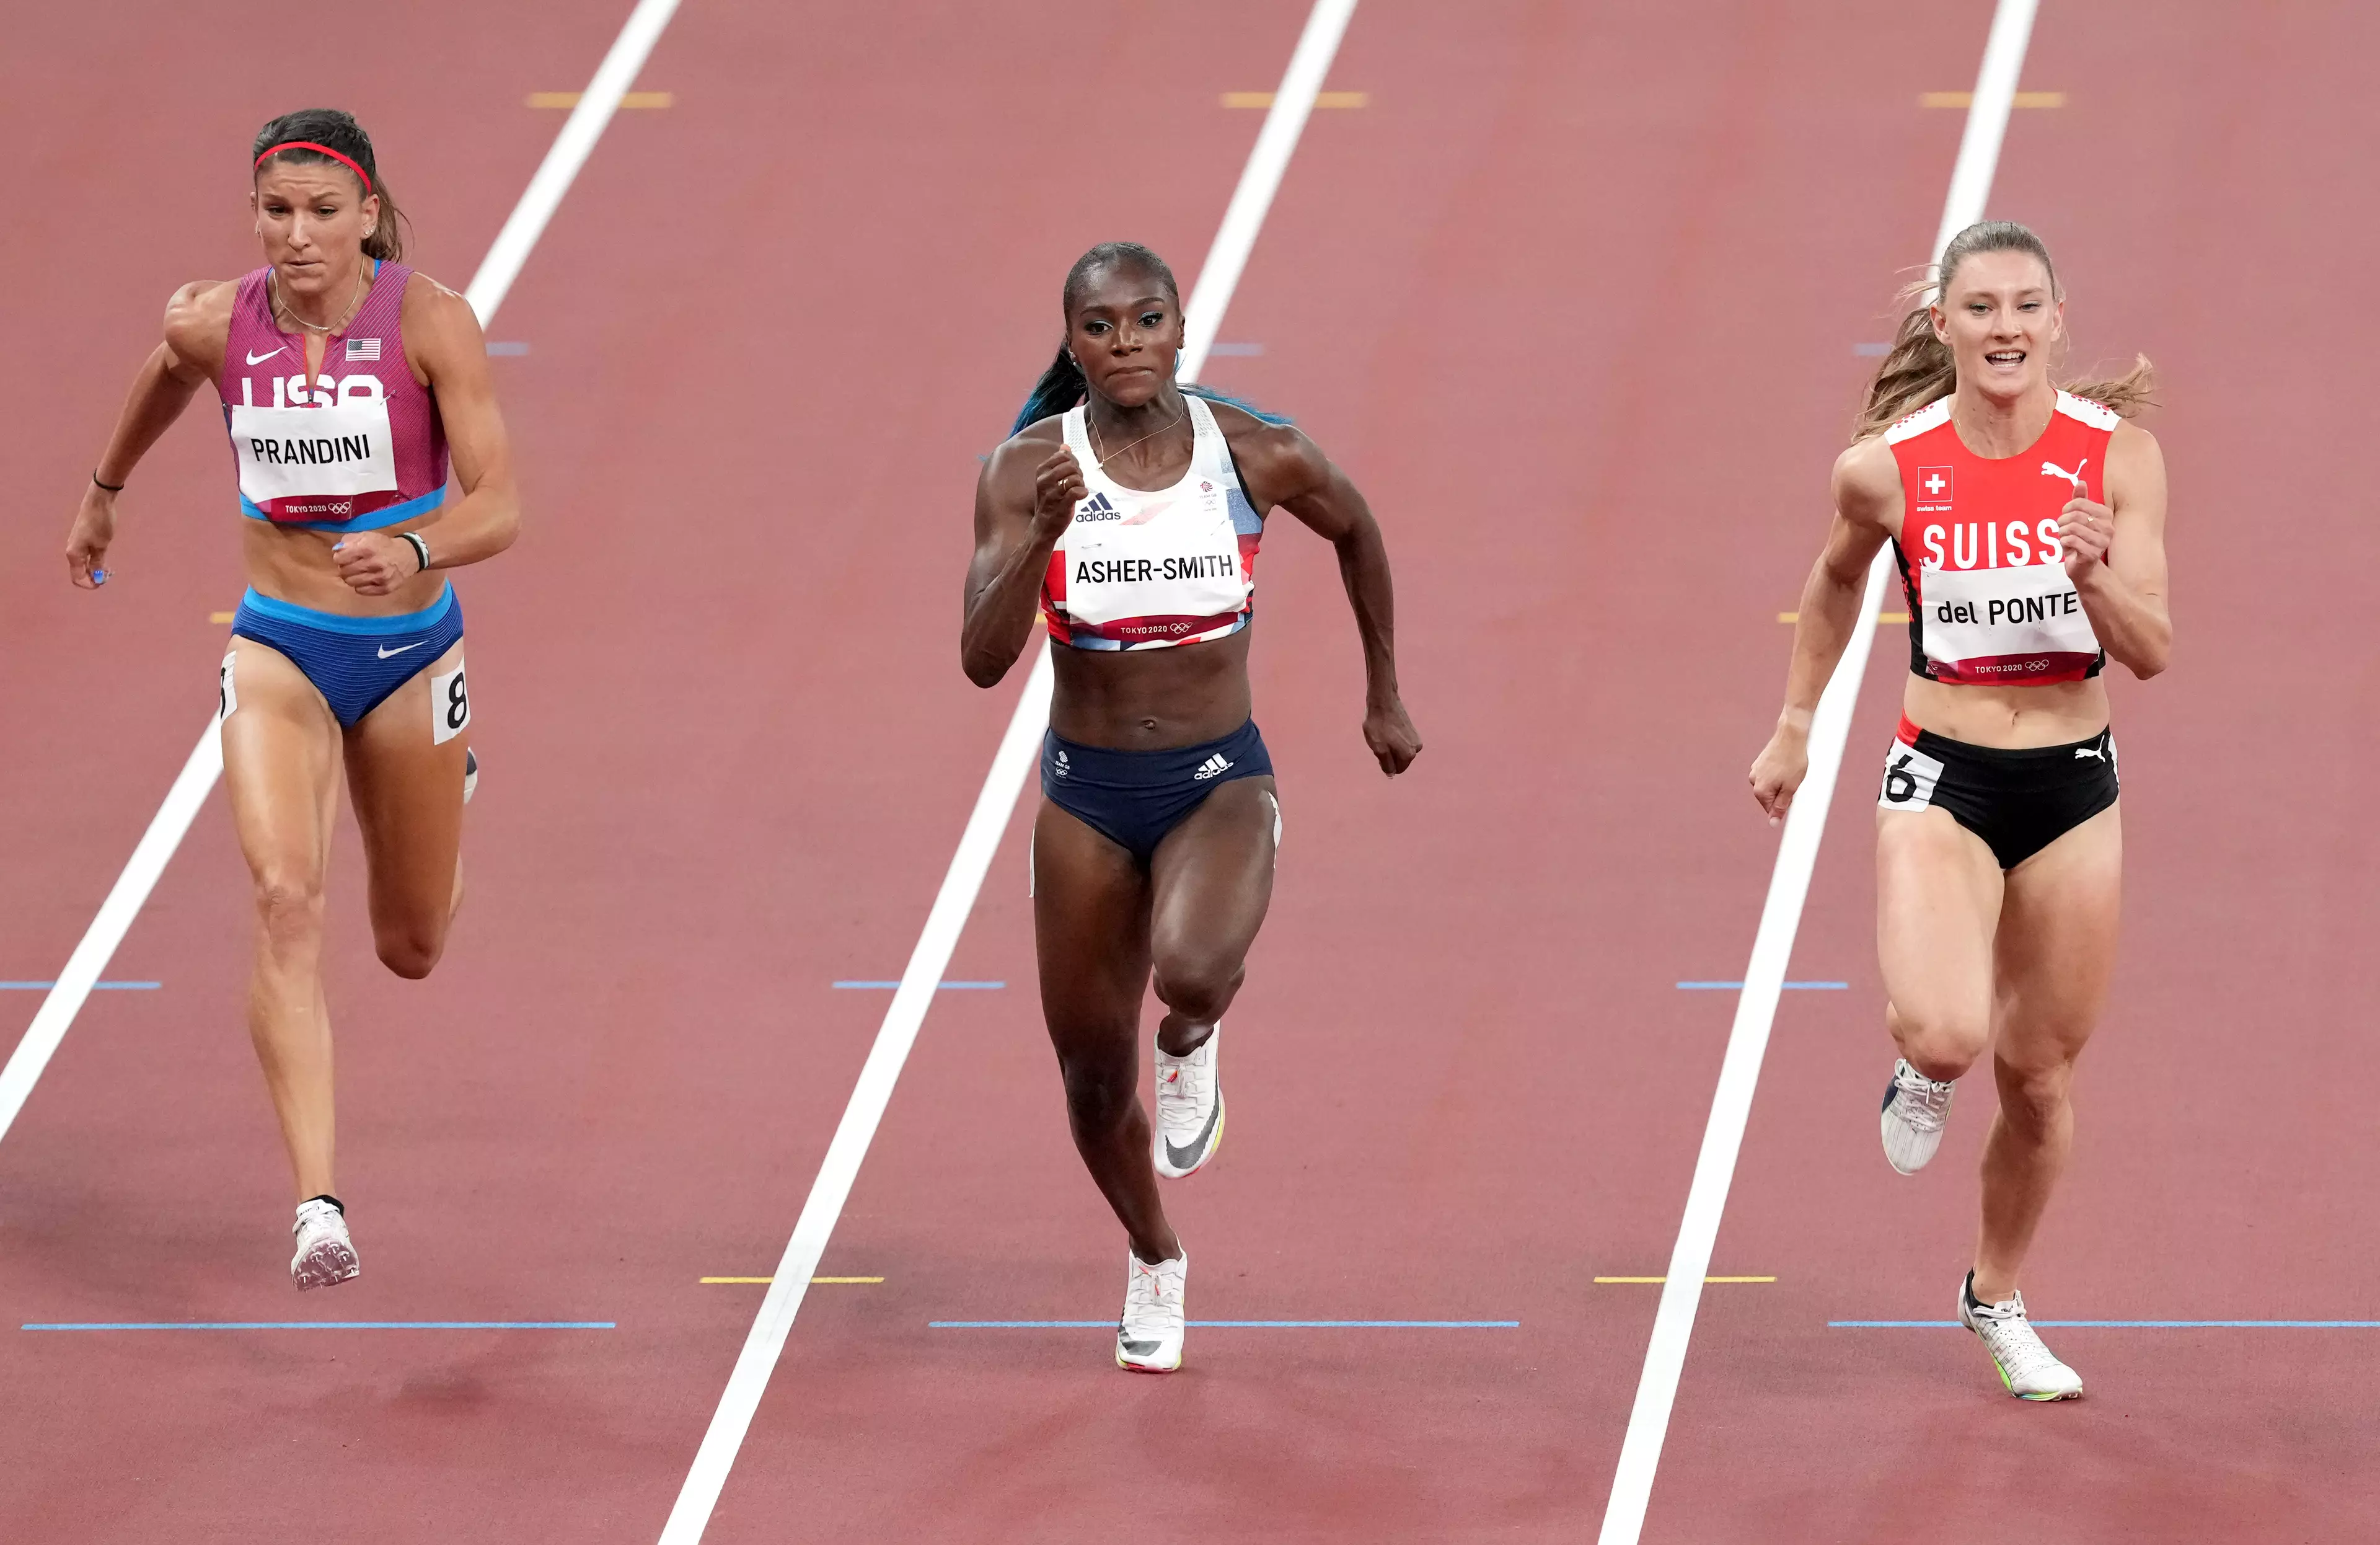 Dina Asher-Smith competing in the Women's 100m at Tokyo. (